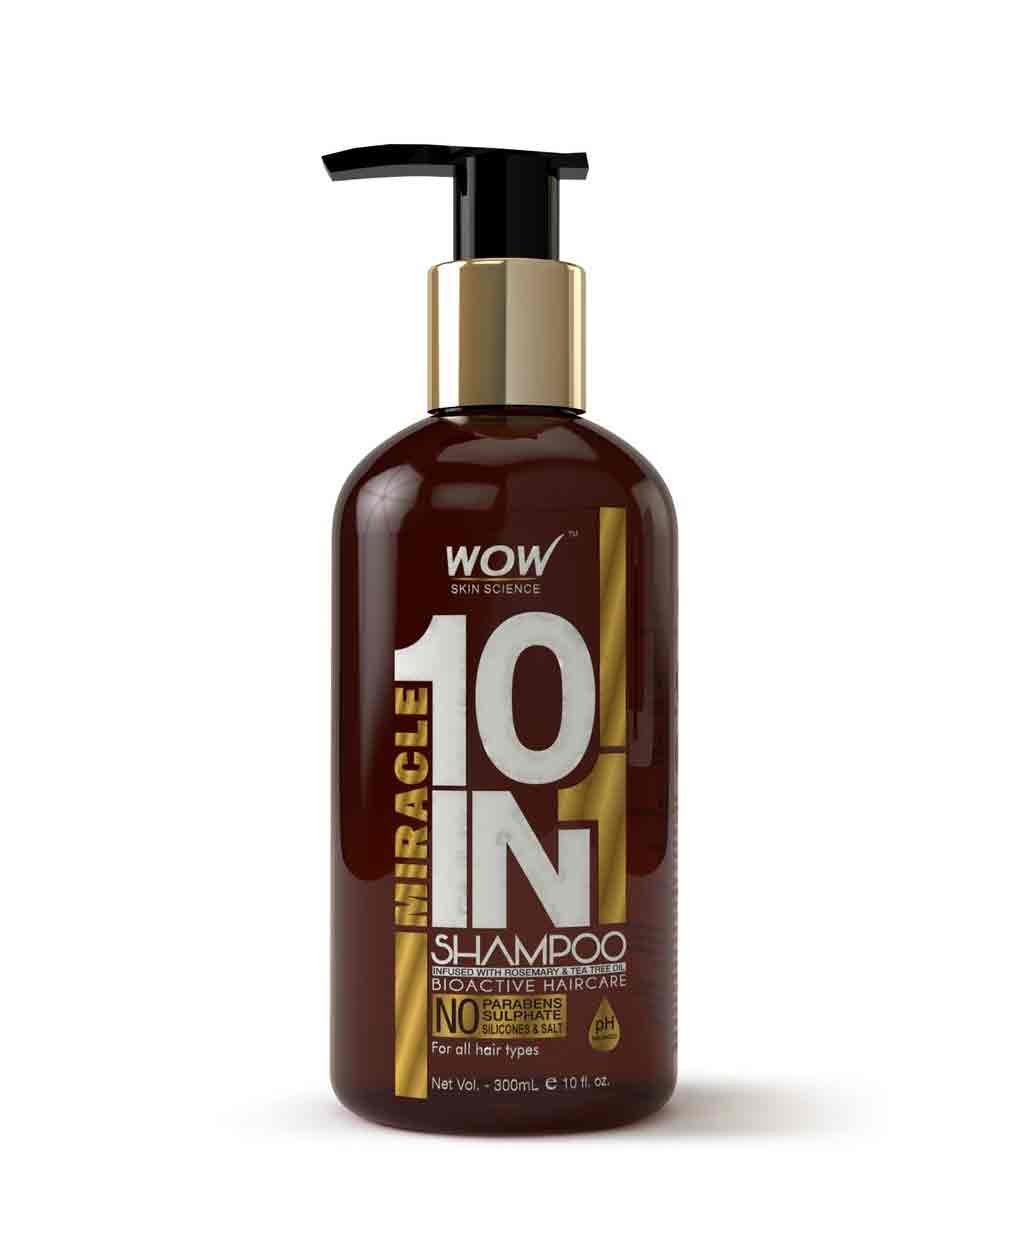 WOW Miracle 10 in 1 No Parabens & Sulphate Shampoo